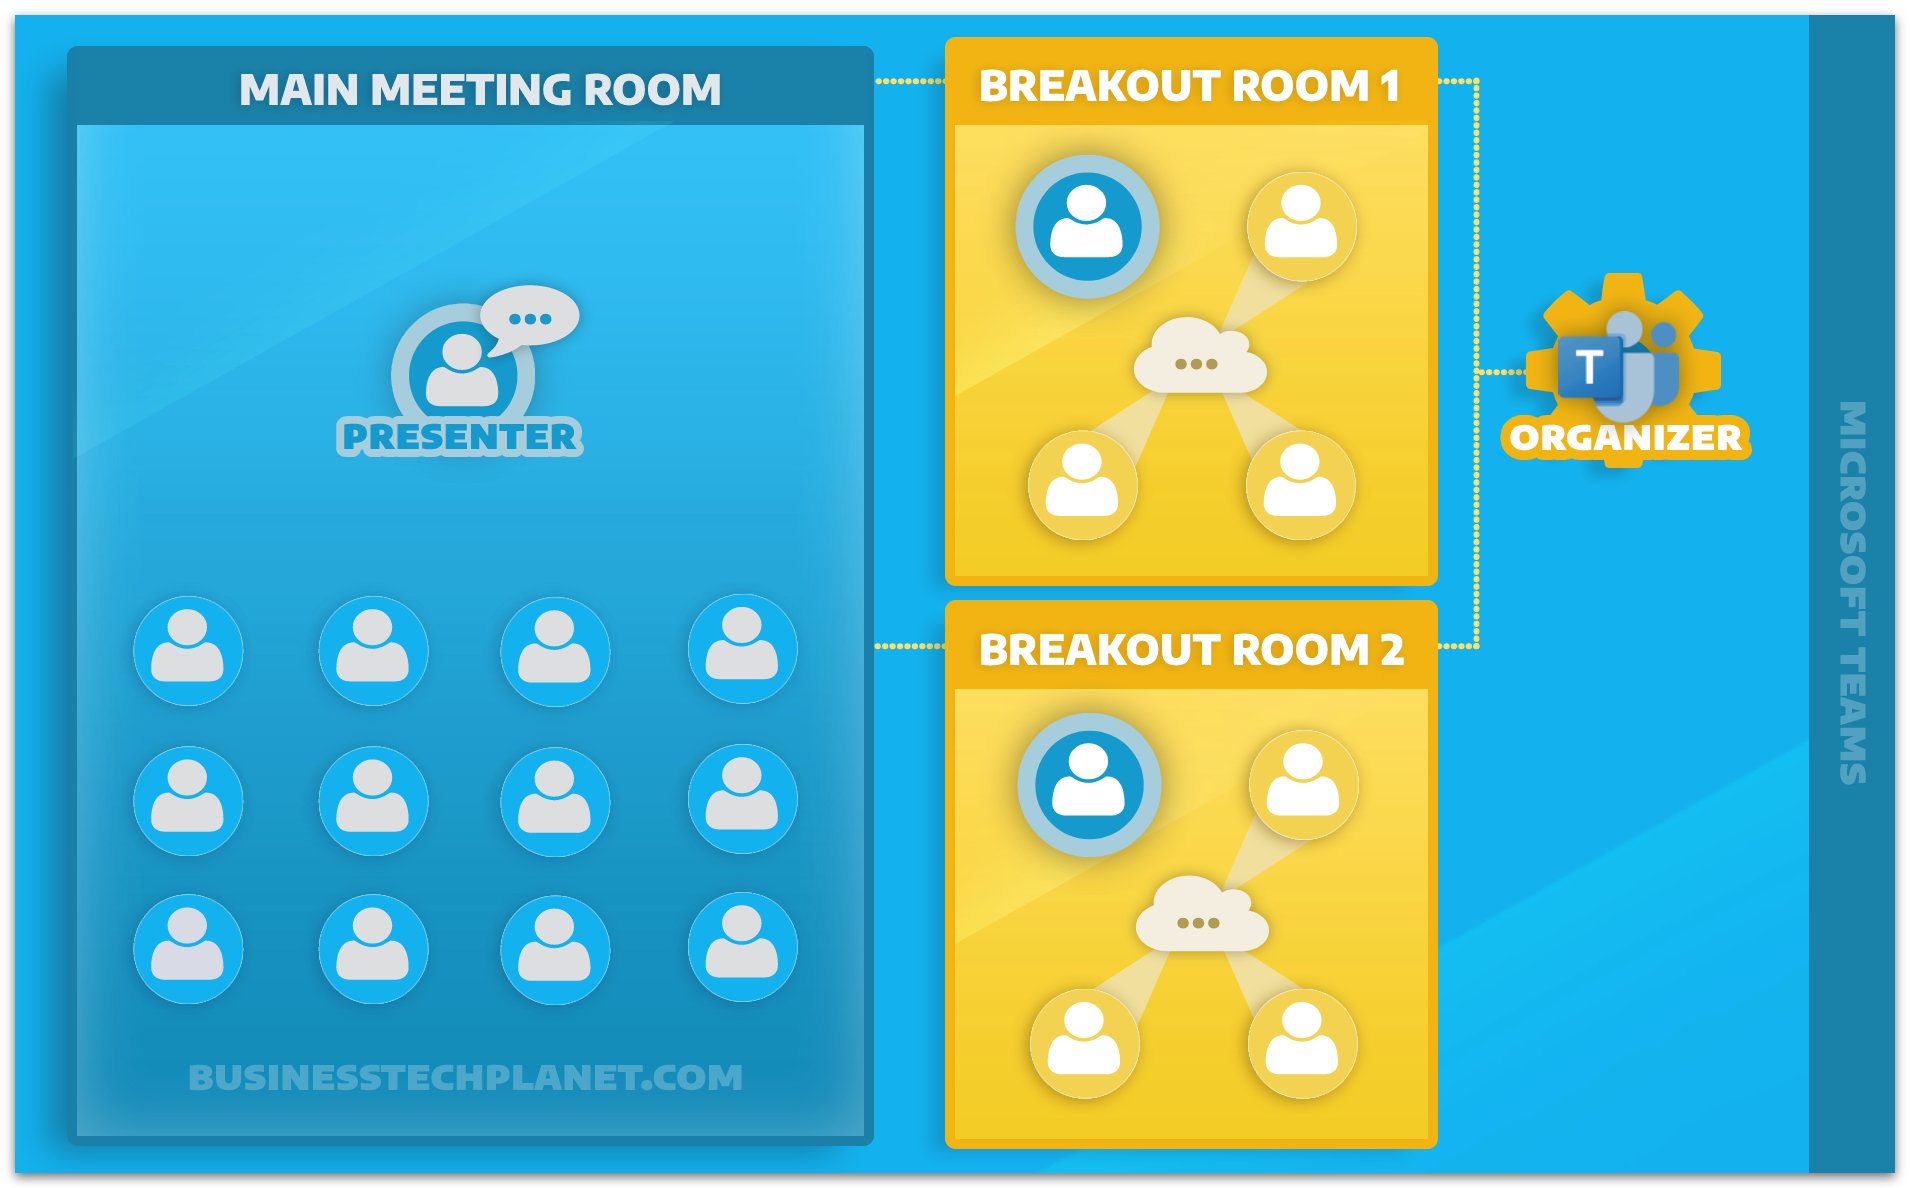 Breakout rooms graphic.